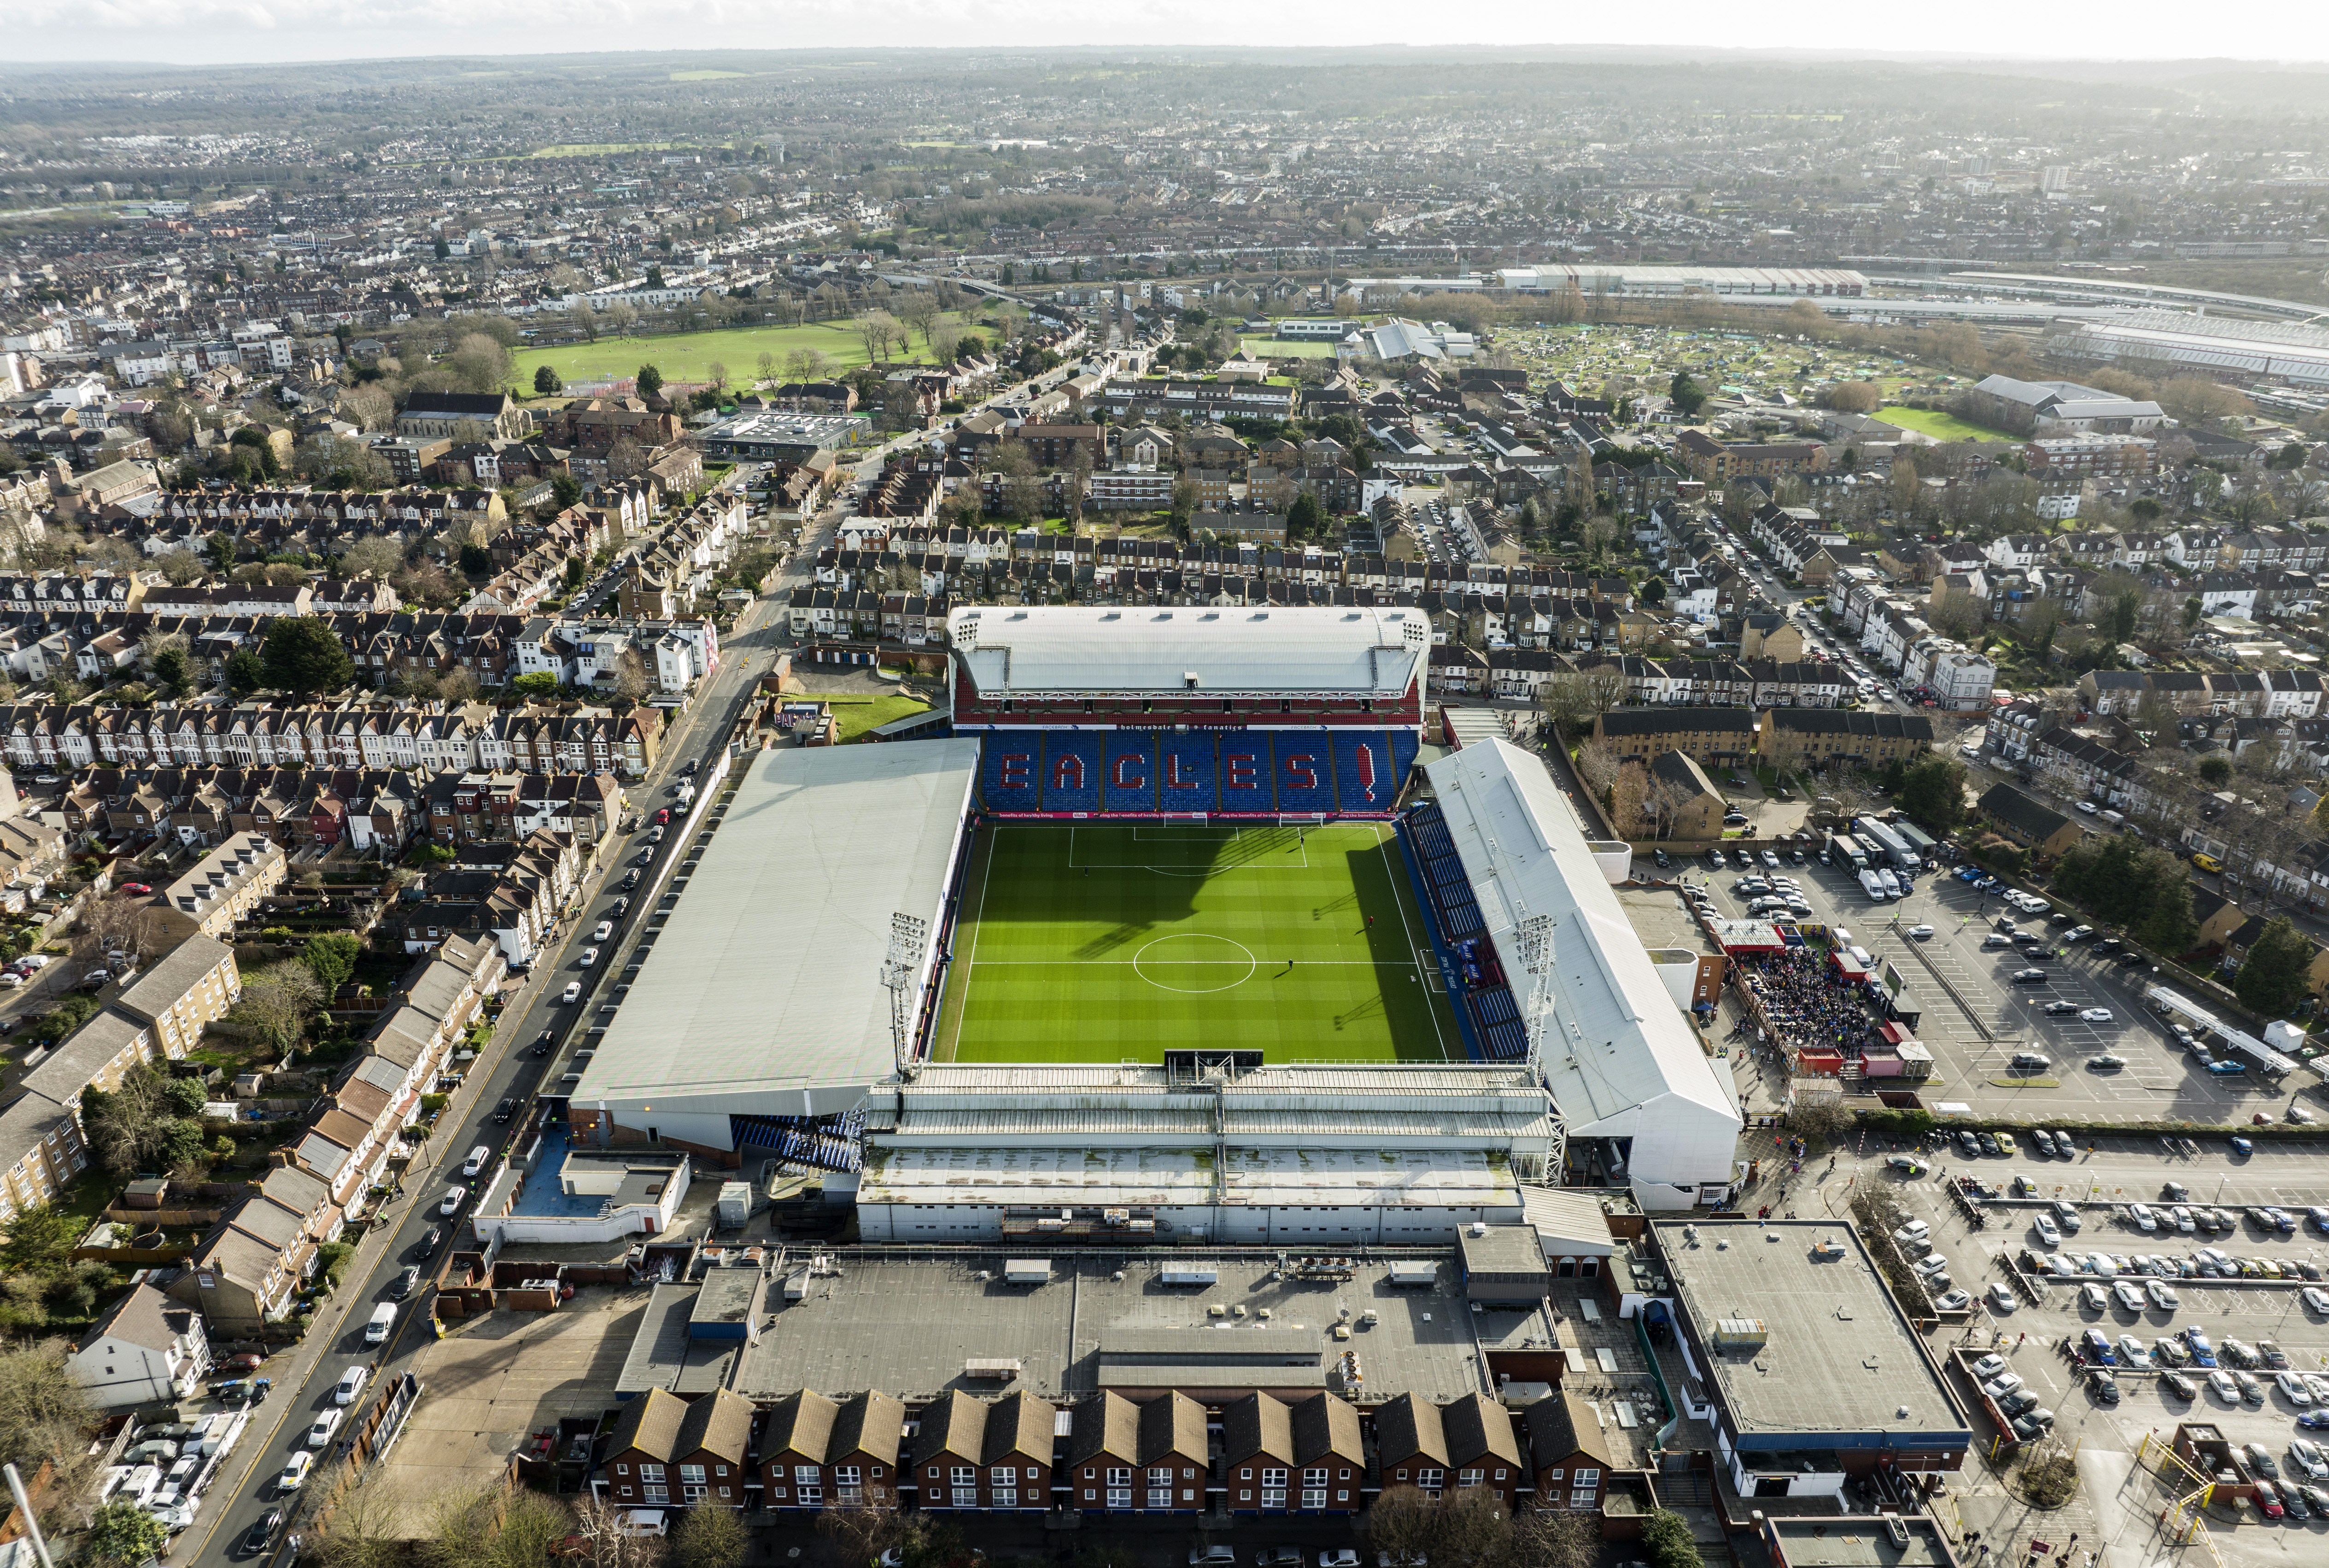 The Crystal Palace ground of the modern day slots into the neighbourhood